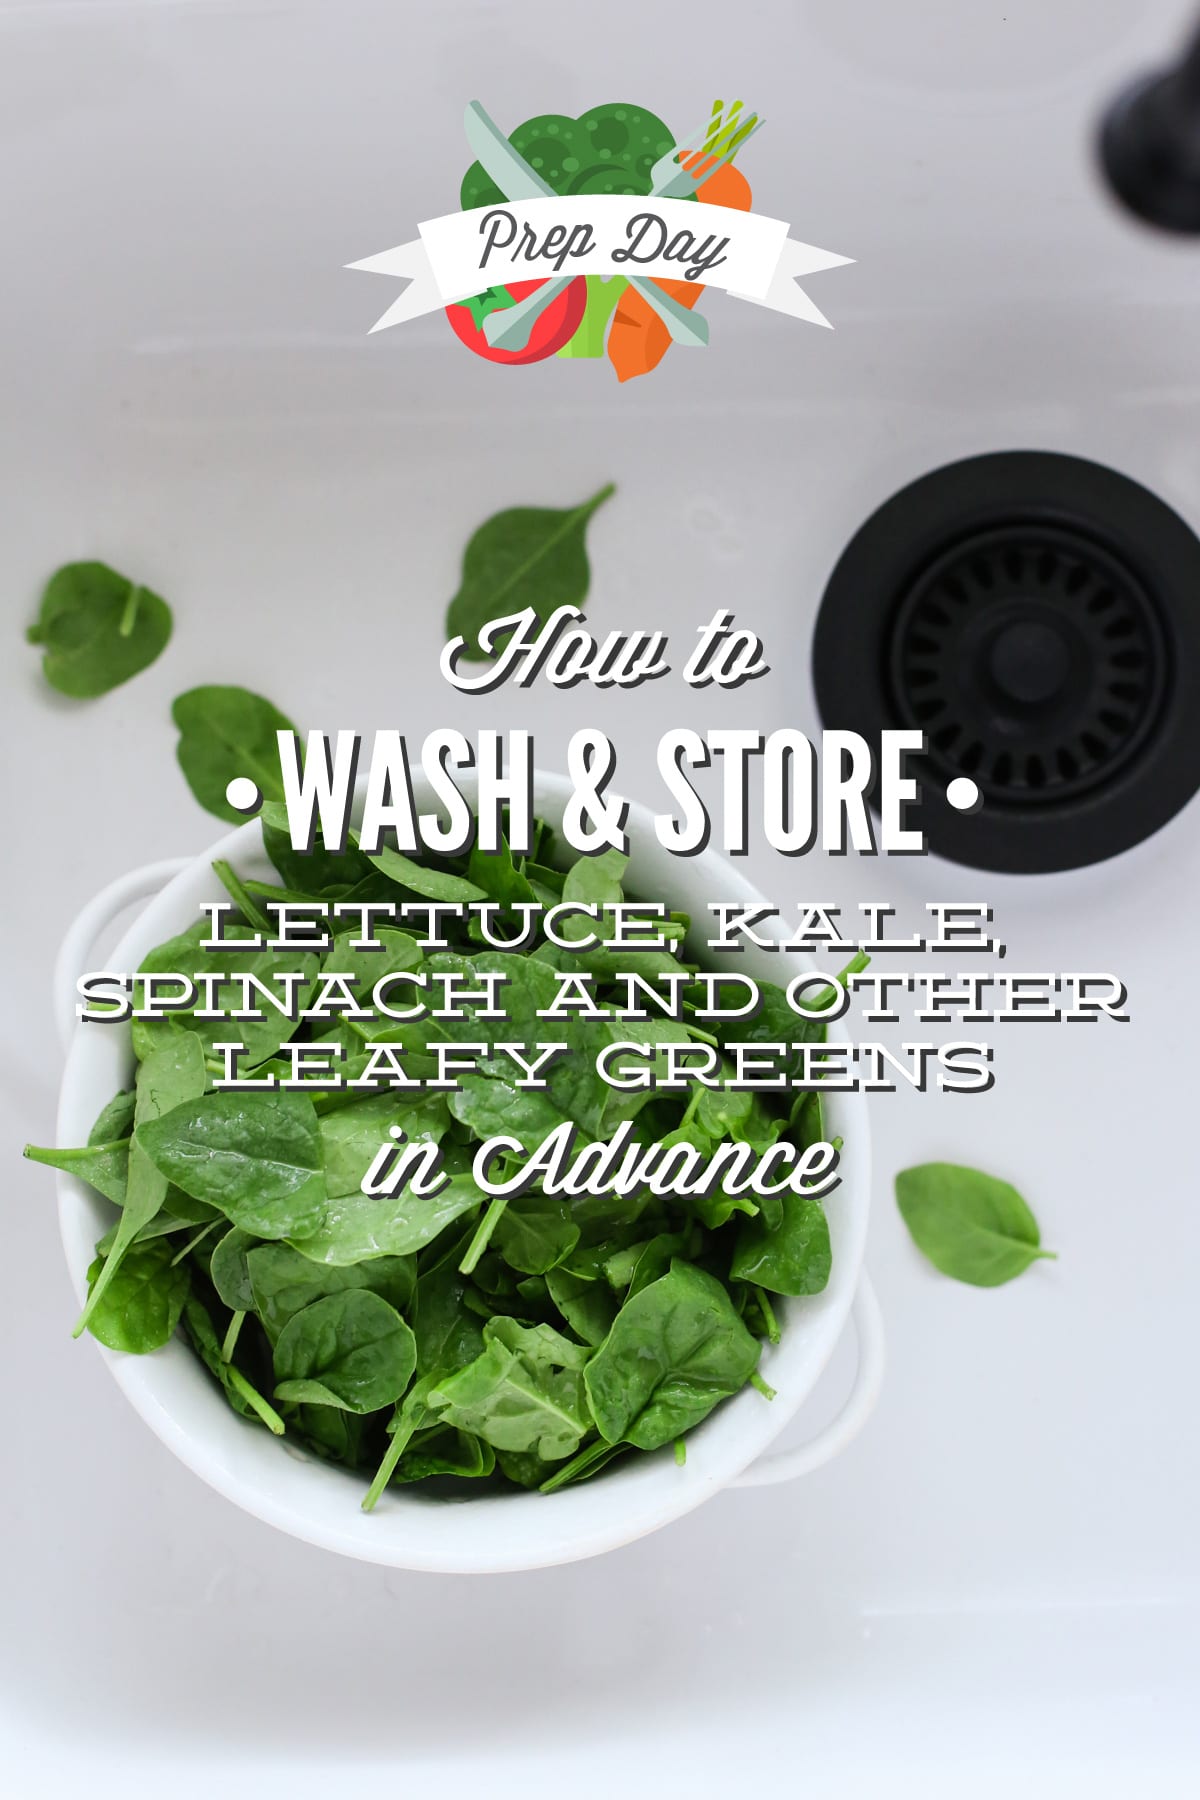 Prep Day: How to Wash and Store Lettuce, Kale, Spinach and Other Leafy Greens in Advance - Live Simply